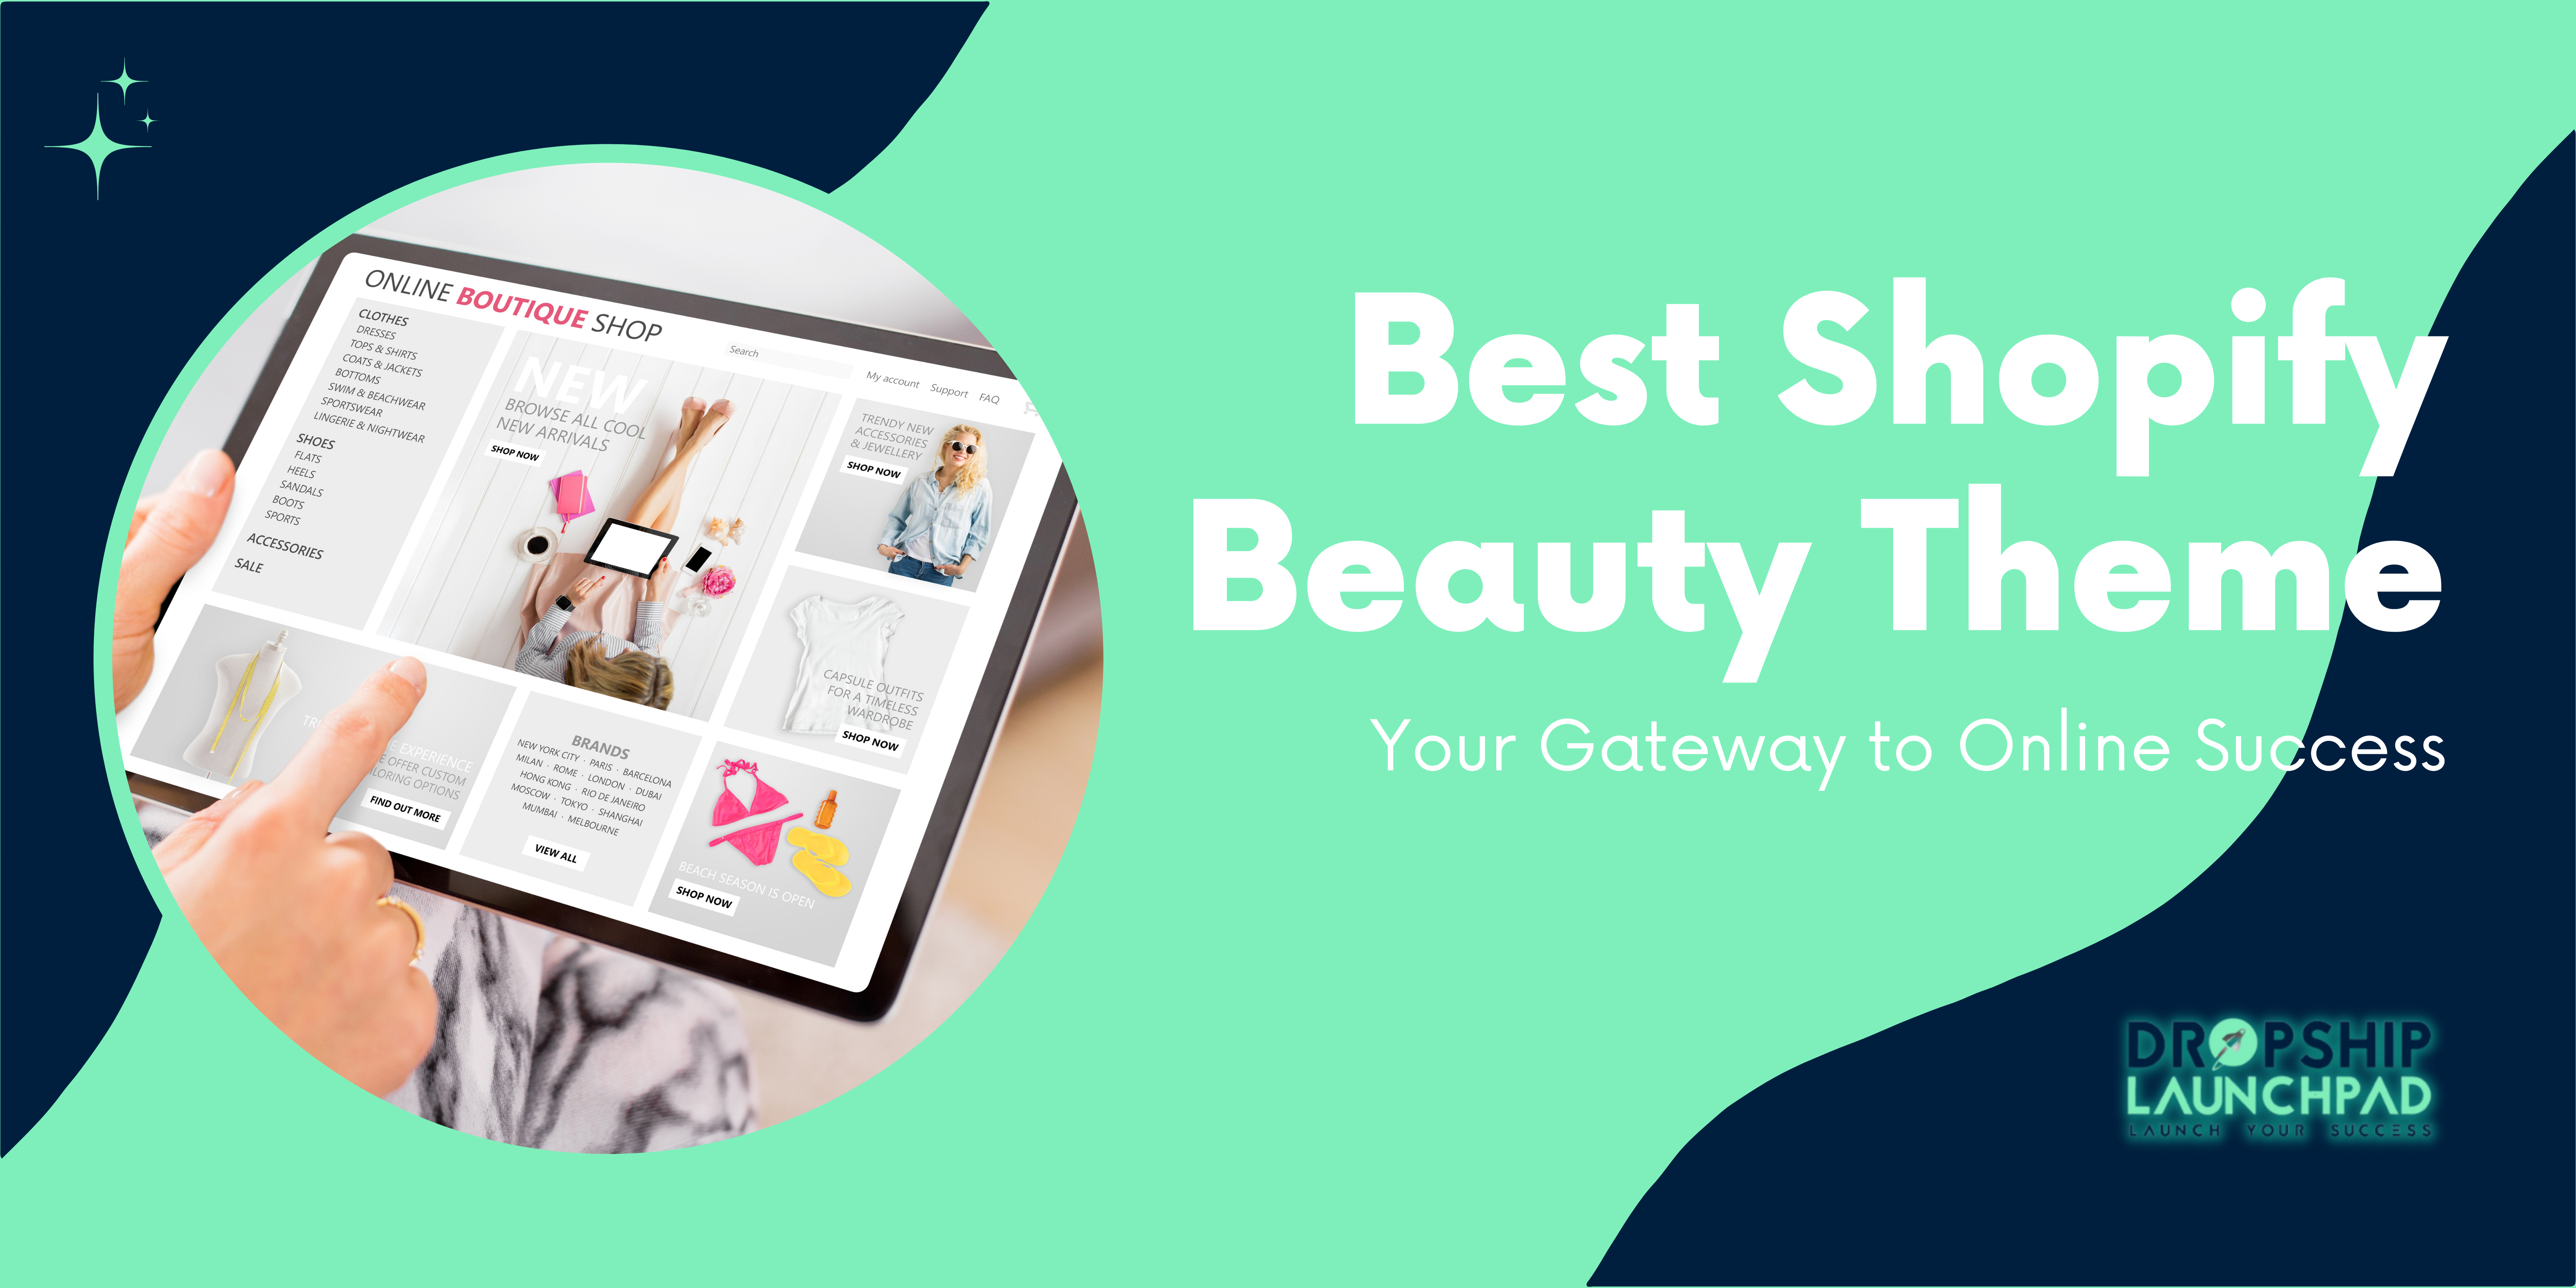 Best Shopify Beauty Theme Your Gateway to Online Success